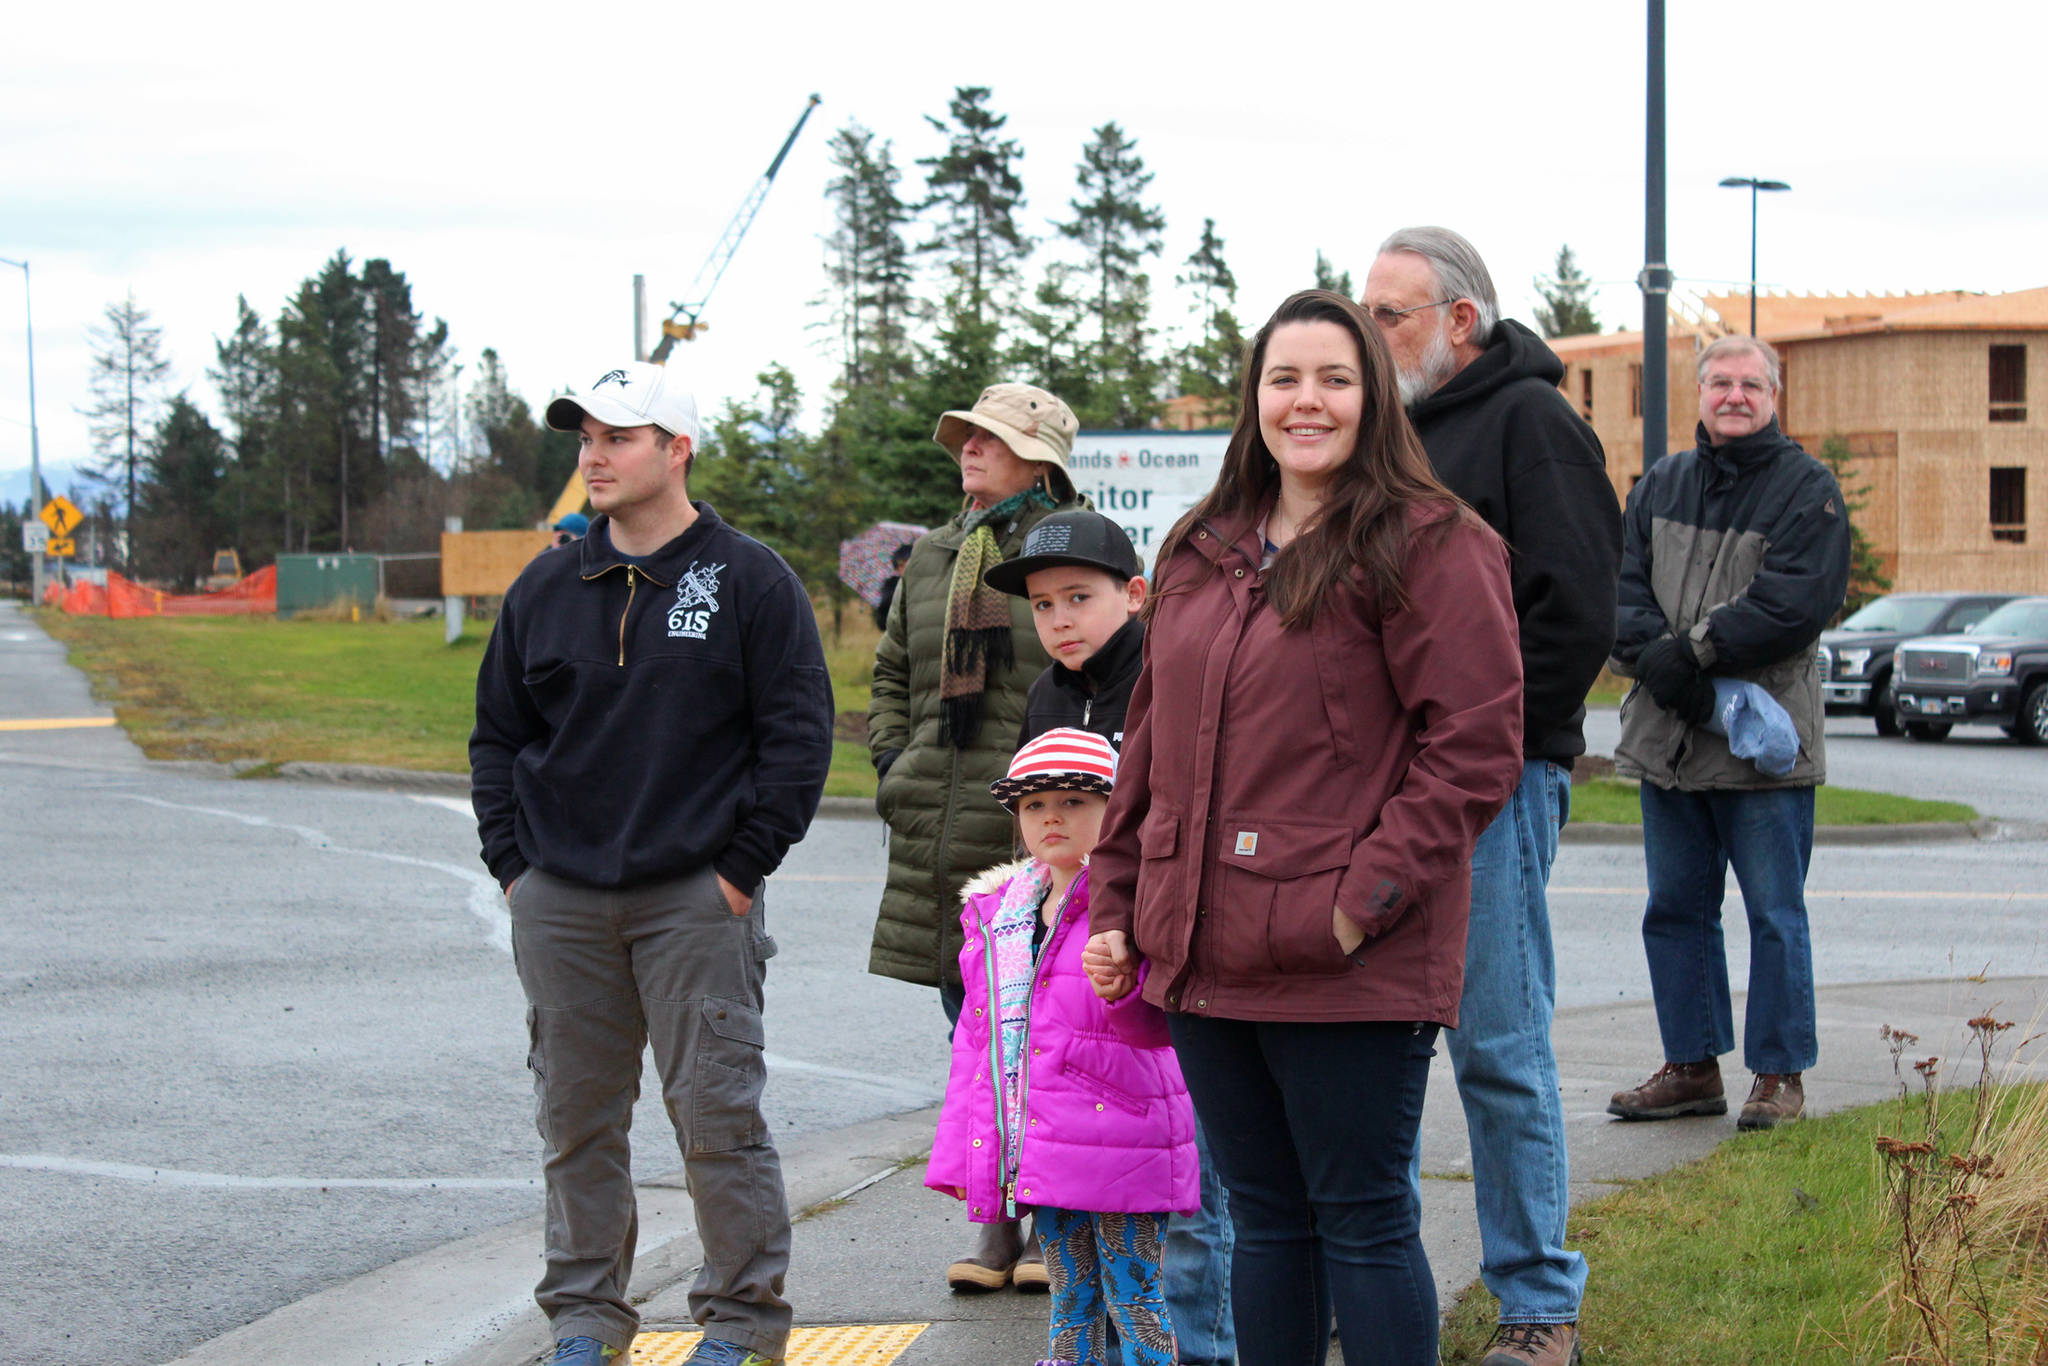 Onlookers welcome a parade of veterans to the Alaska Islands and Oceans Center for a ceremony after the parade held Sunday, Nov. 11, 2018 in Homer, Alaska. (Photo by Megan Pacer/Homer News)